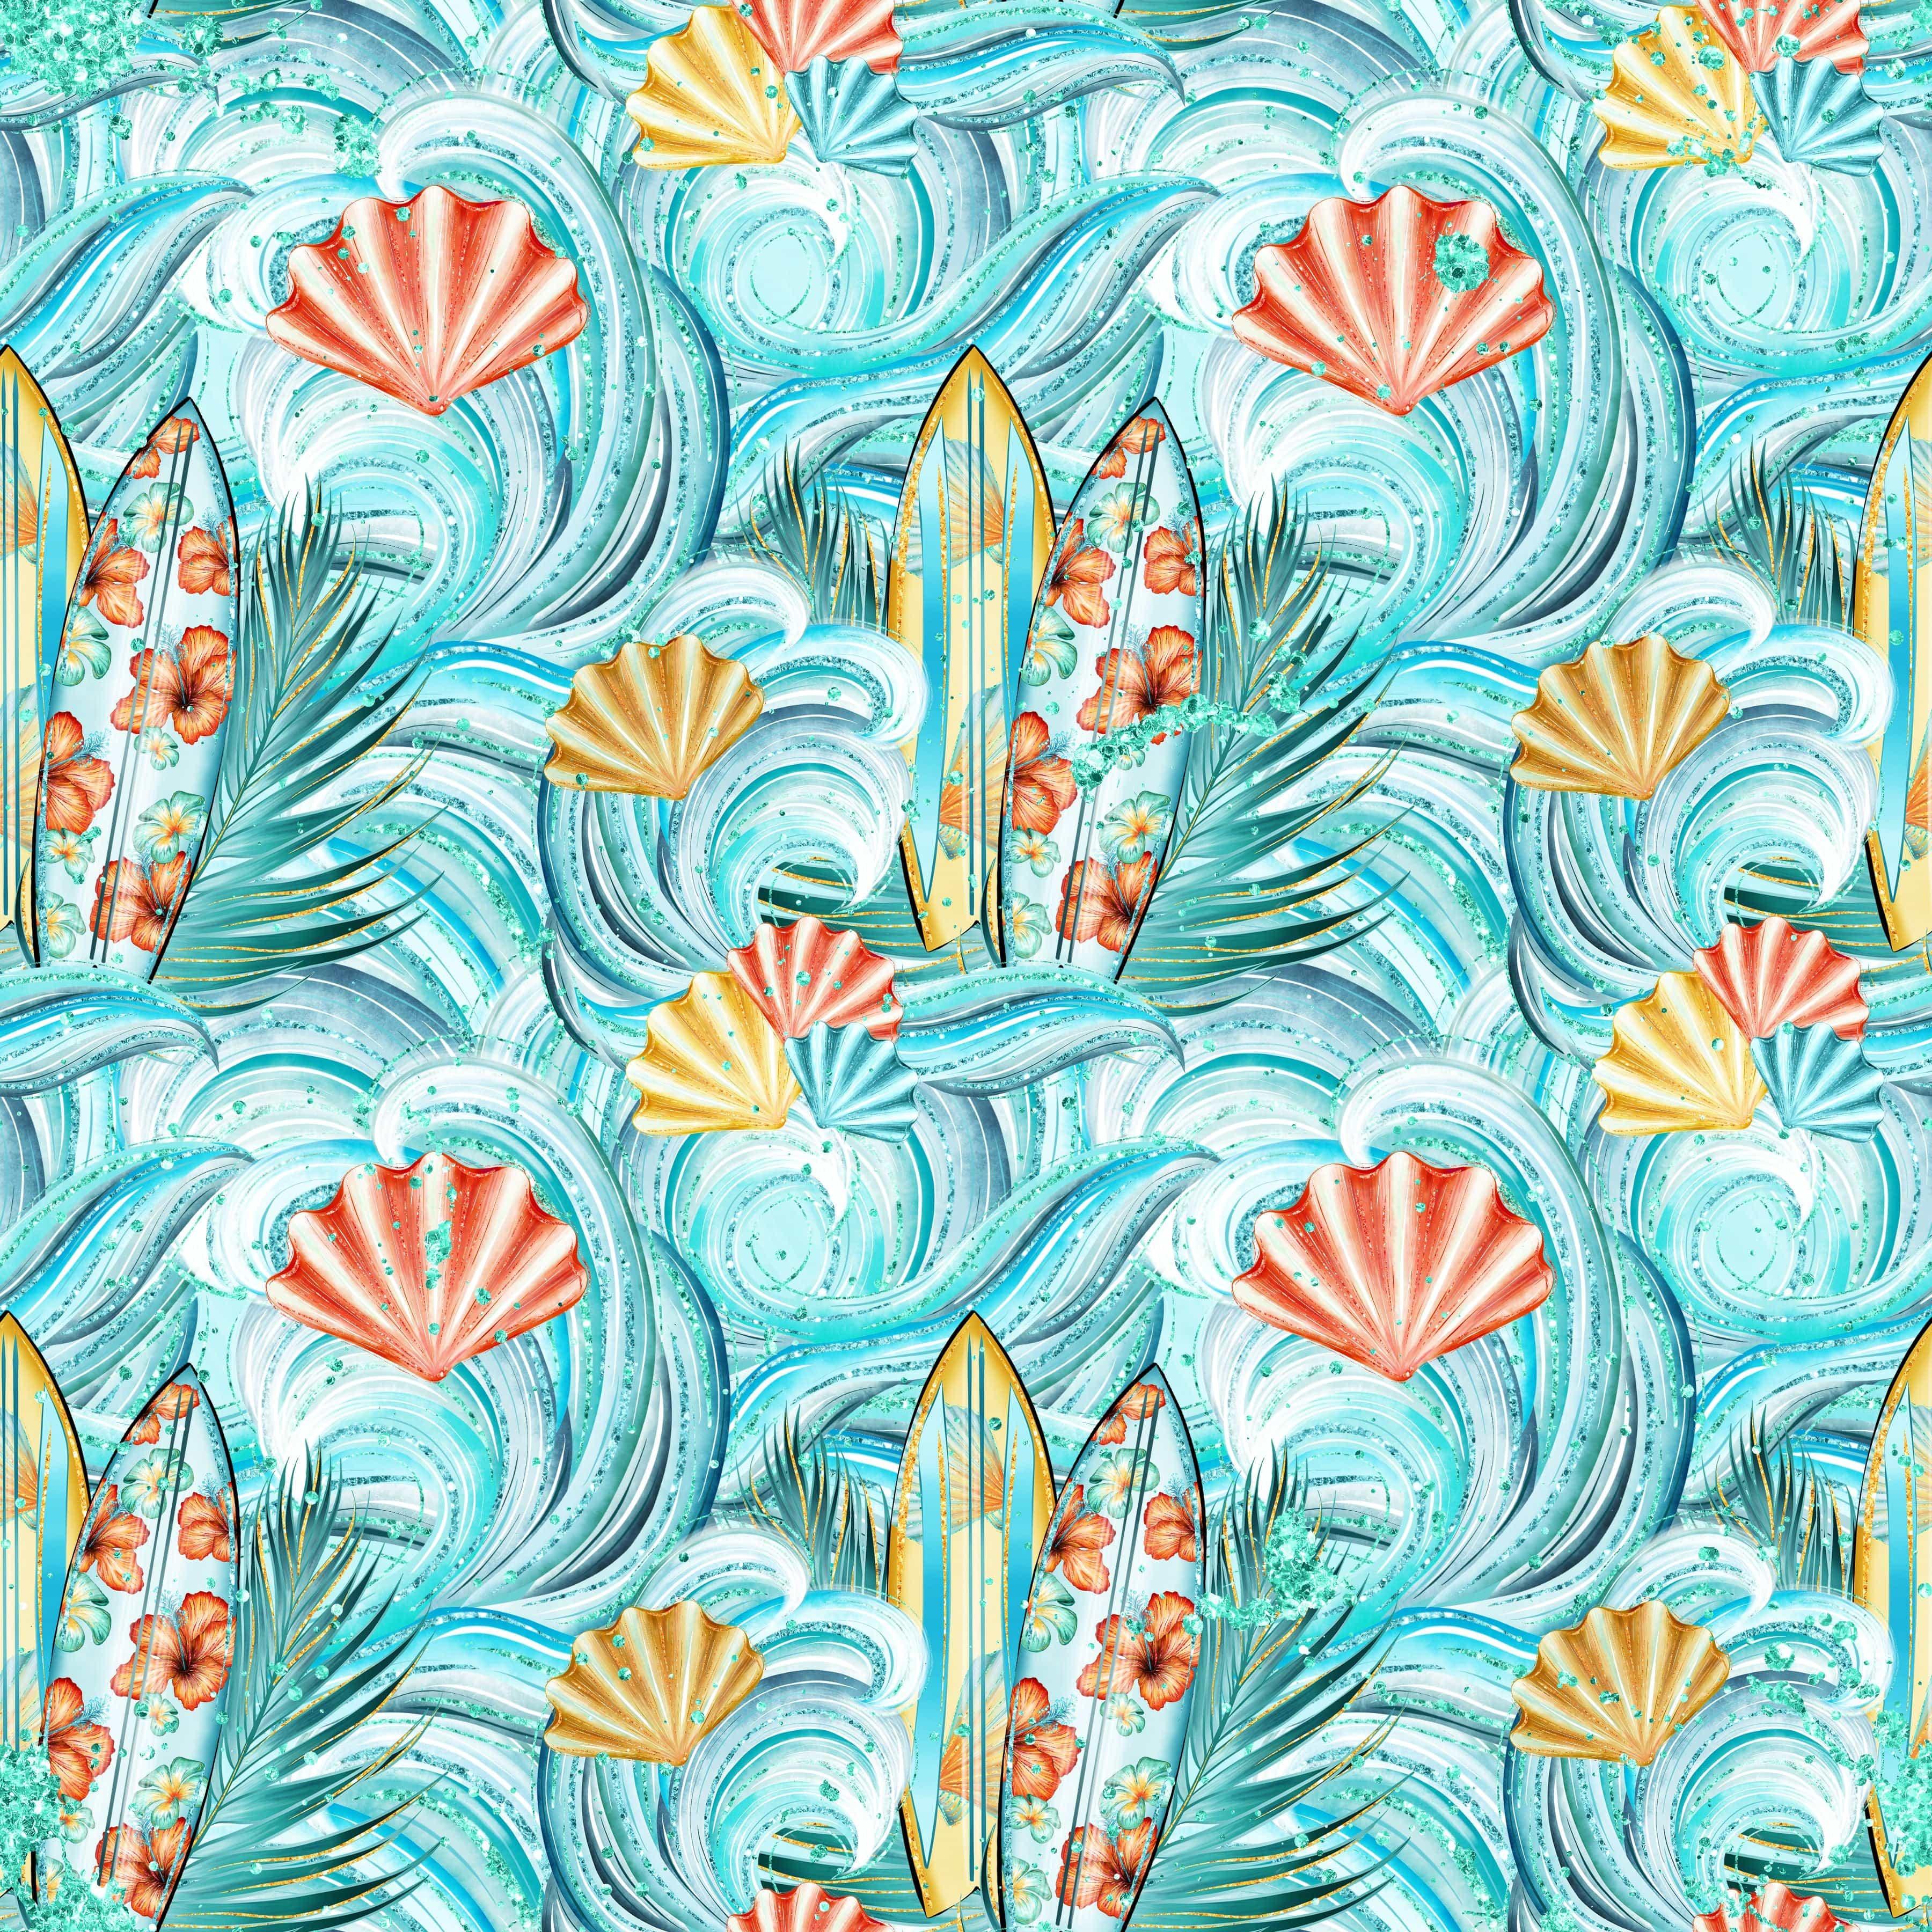  Tropics Collection Seashells 12 x 12 Double-Sided Scrapbook Paper by SSC Designs - Scrapbook Supply Companies